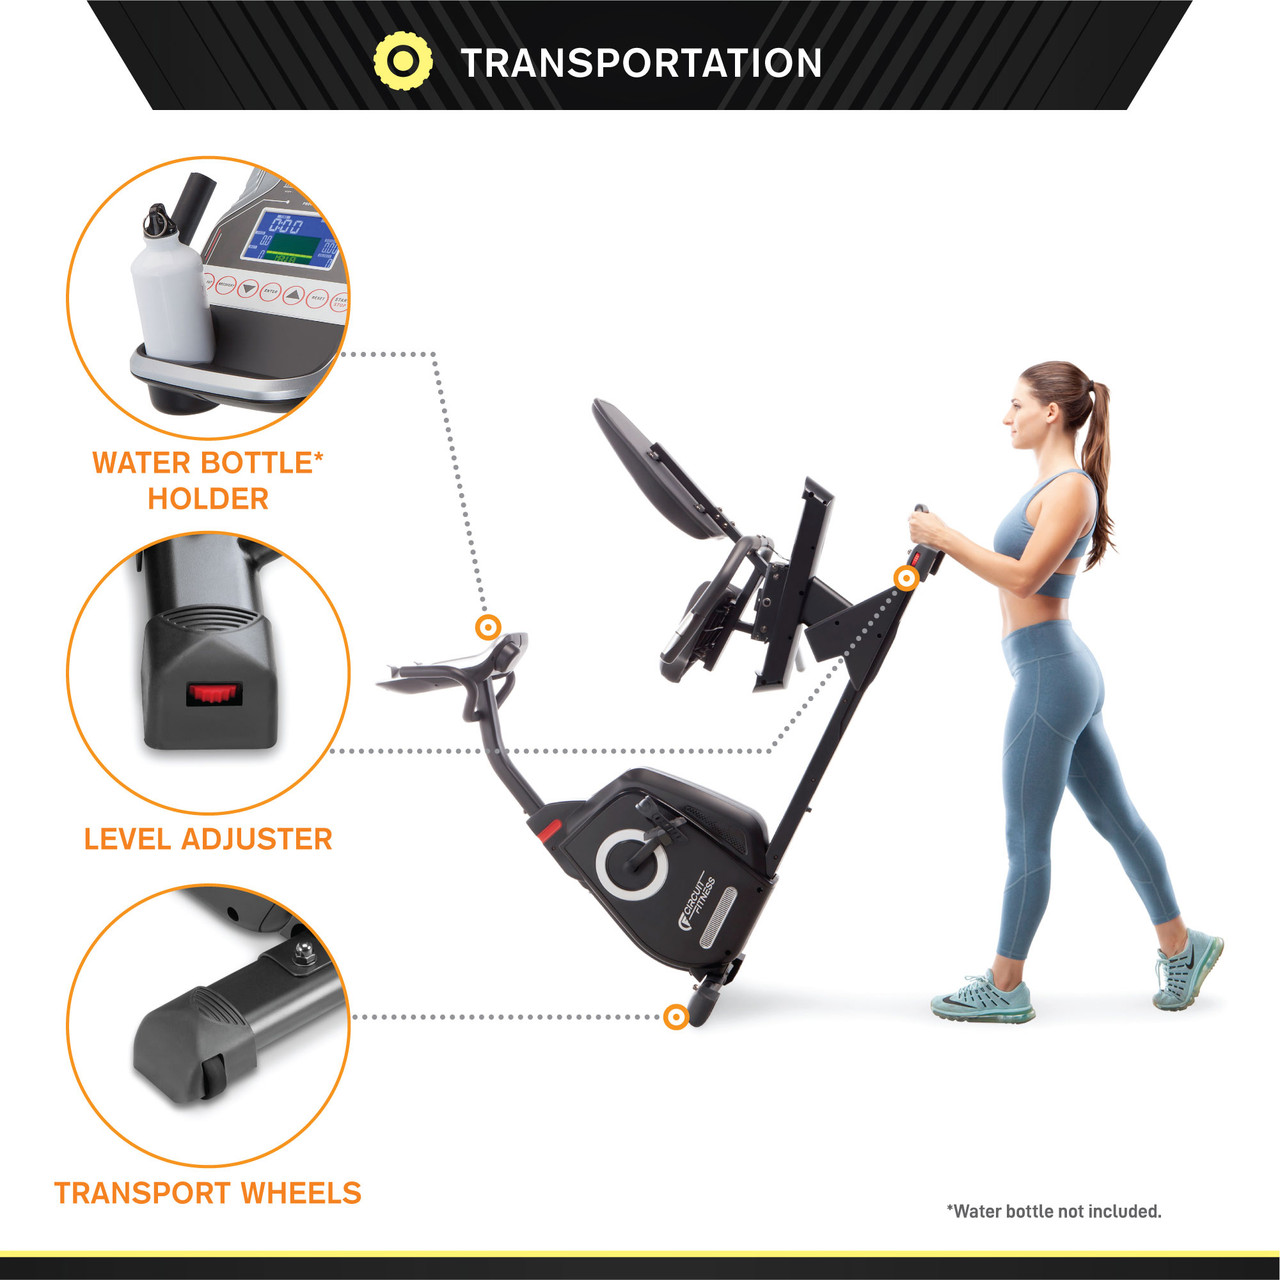 The Regenerating Magnetic Recumbent Bike | Marcy ME-706 includes looped & gripped pedals for added safety during your intense cardio workout